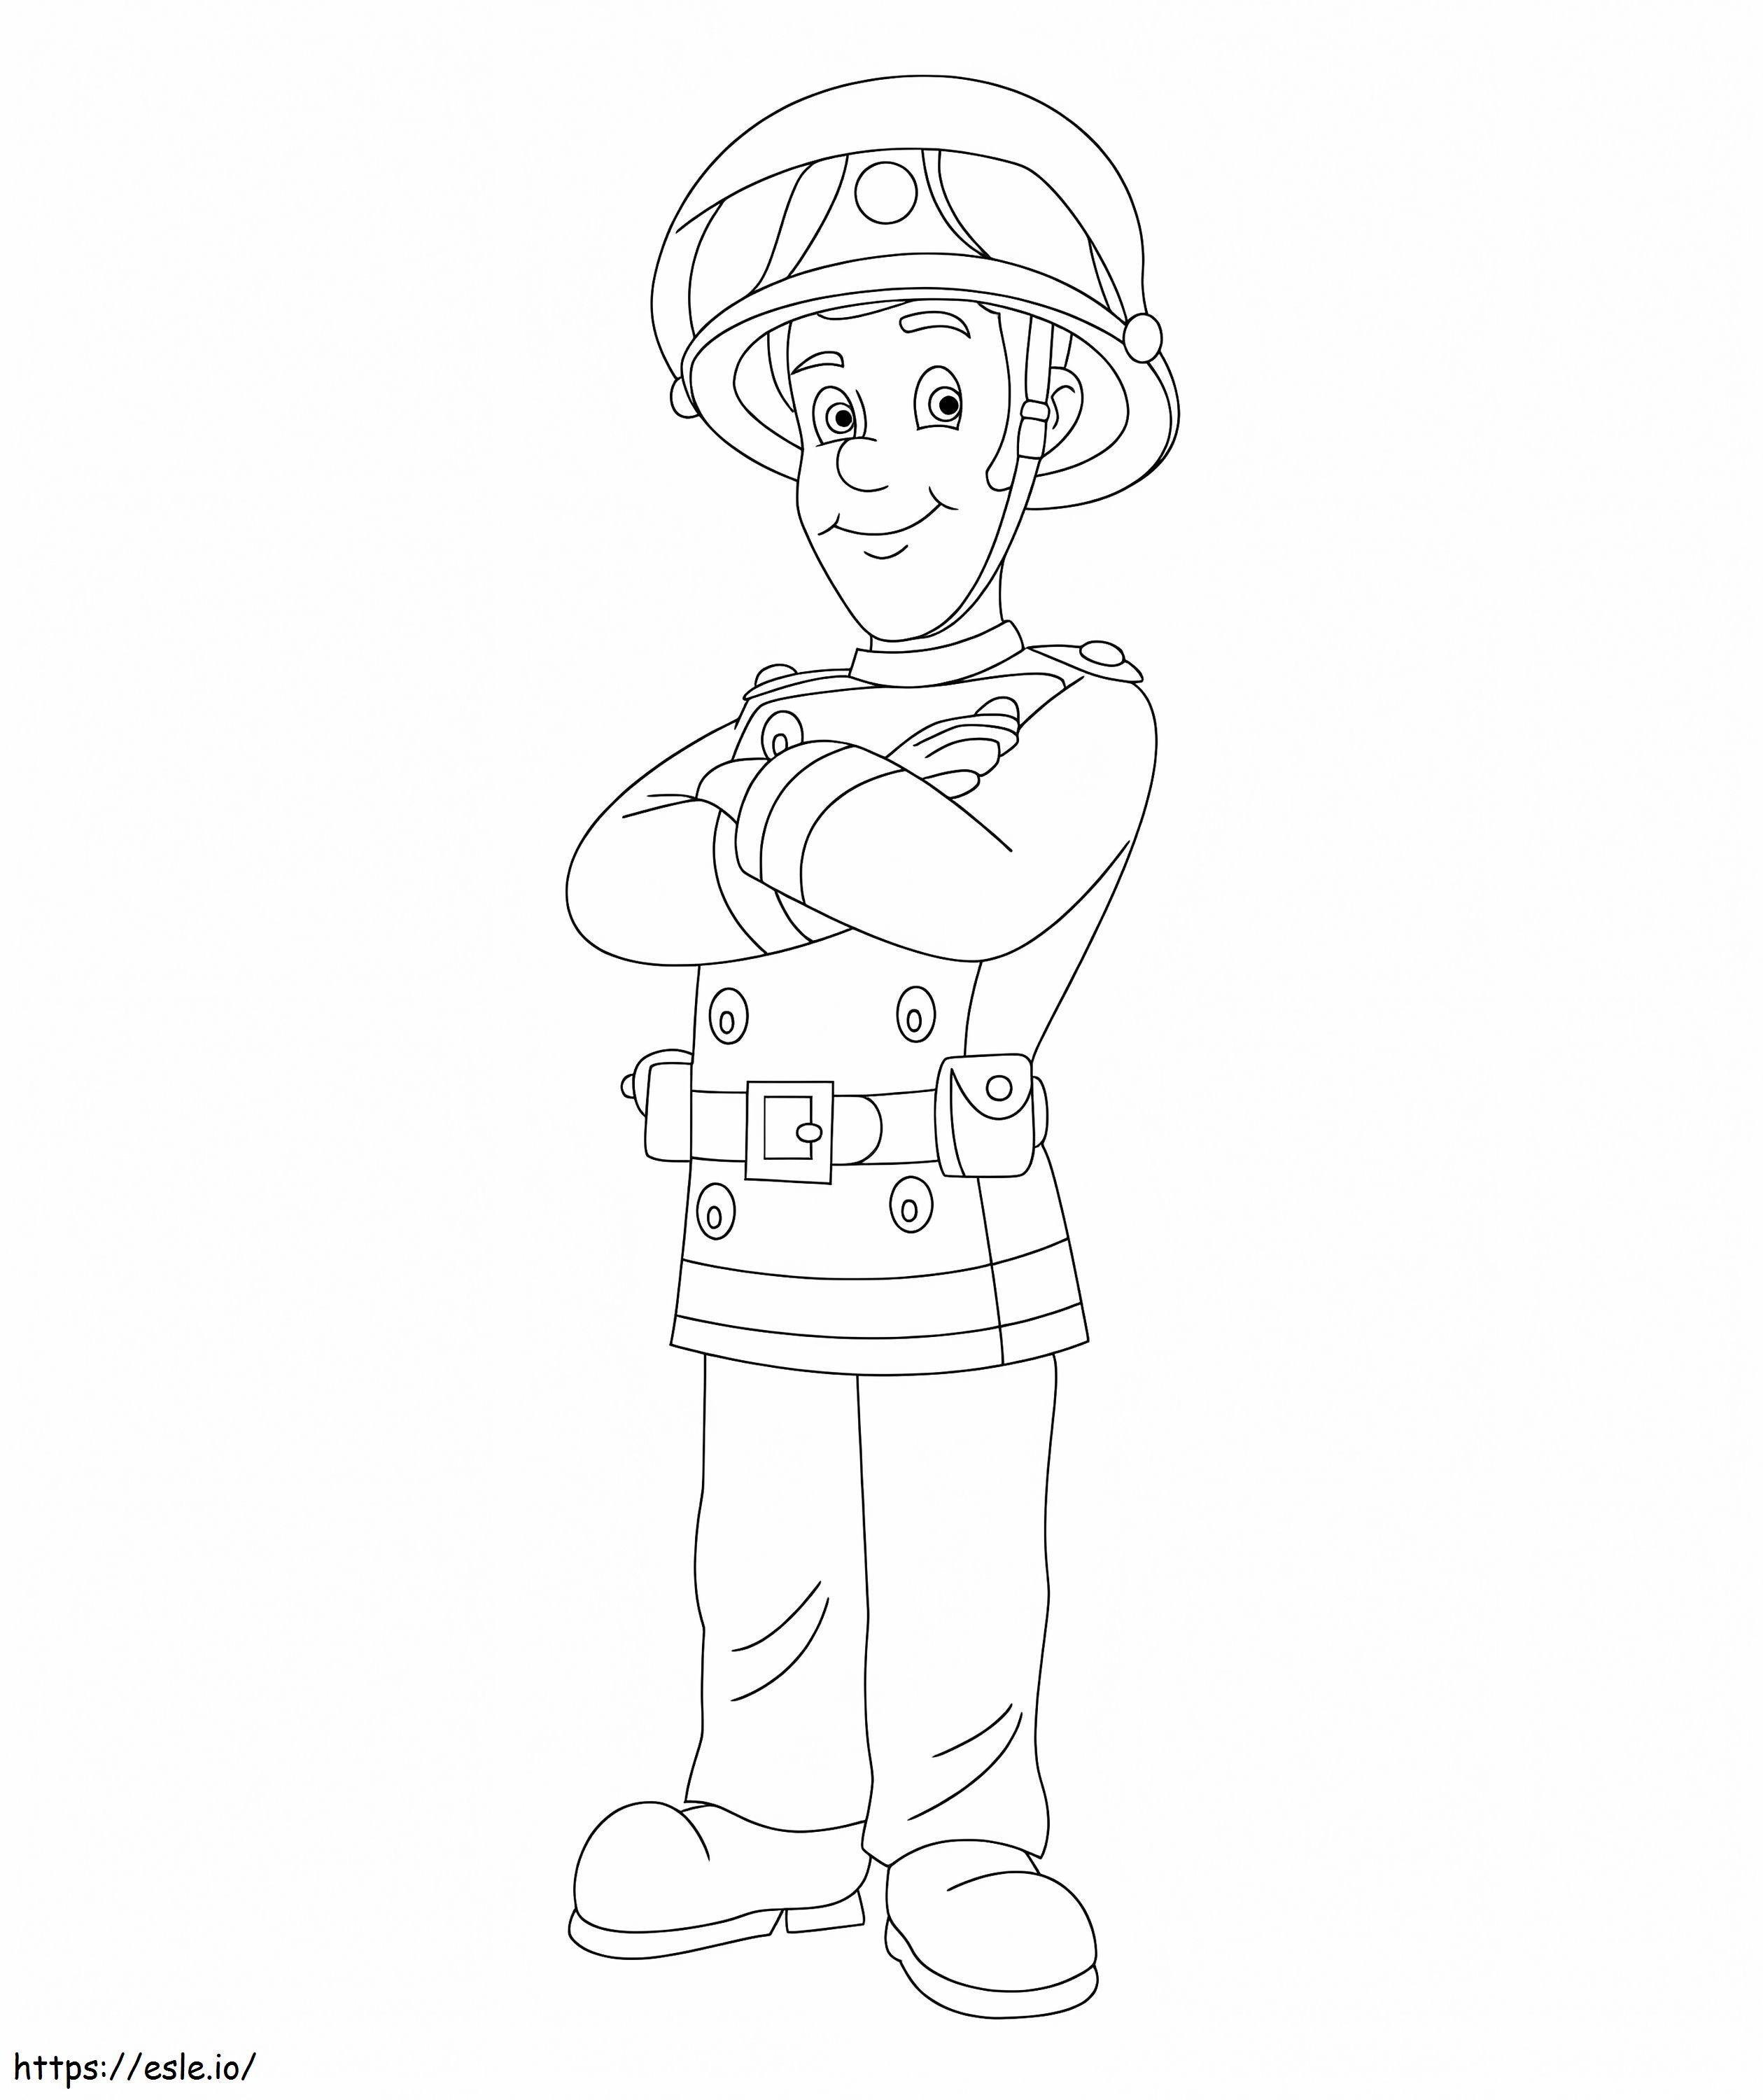 1582621402 Alone coloring page